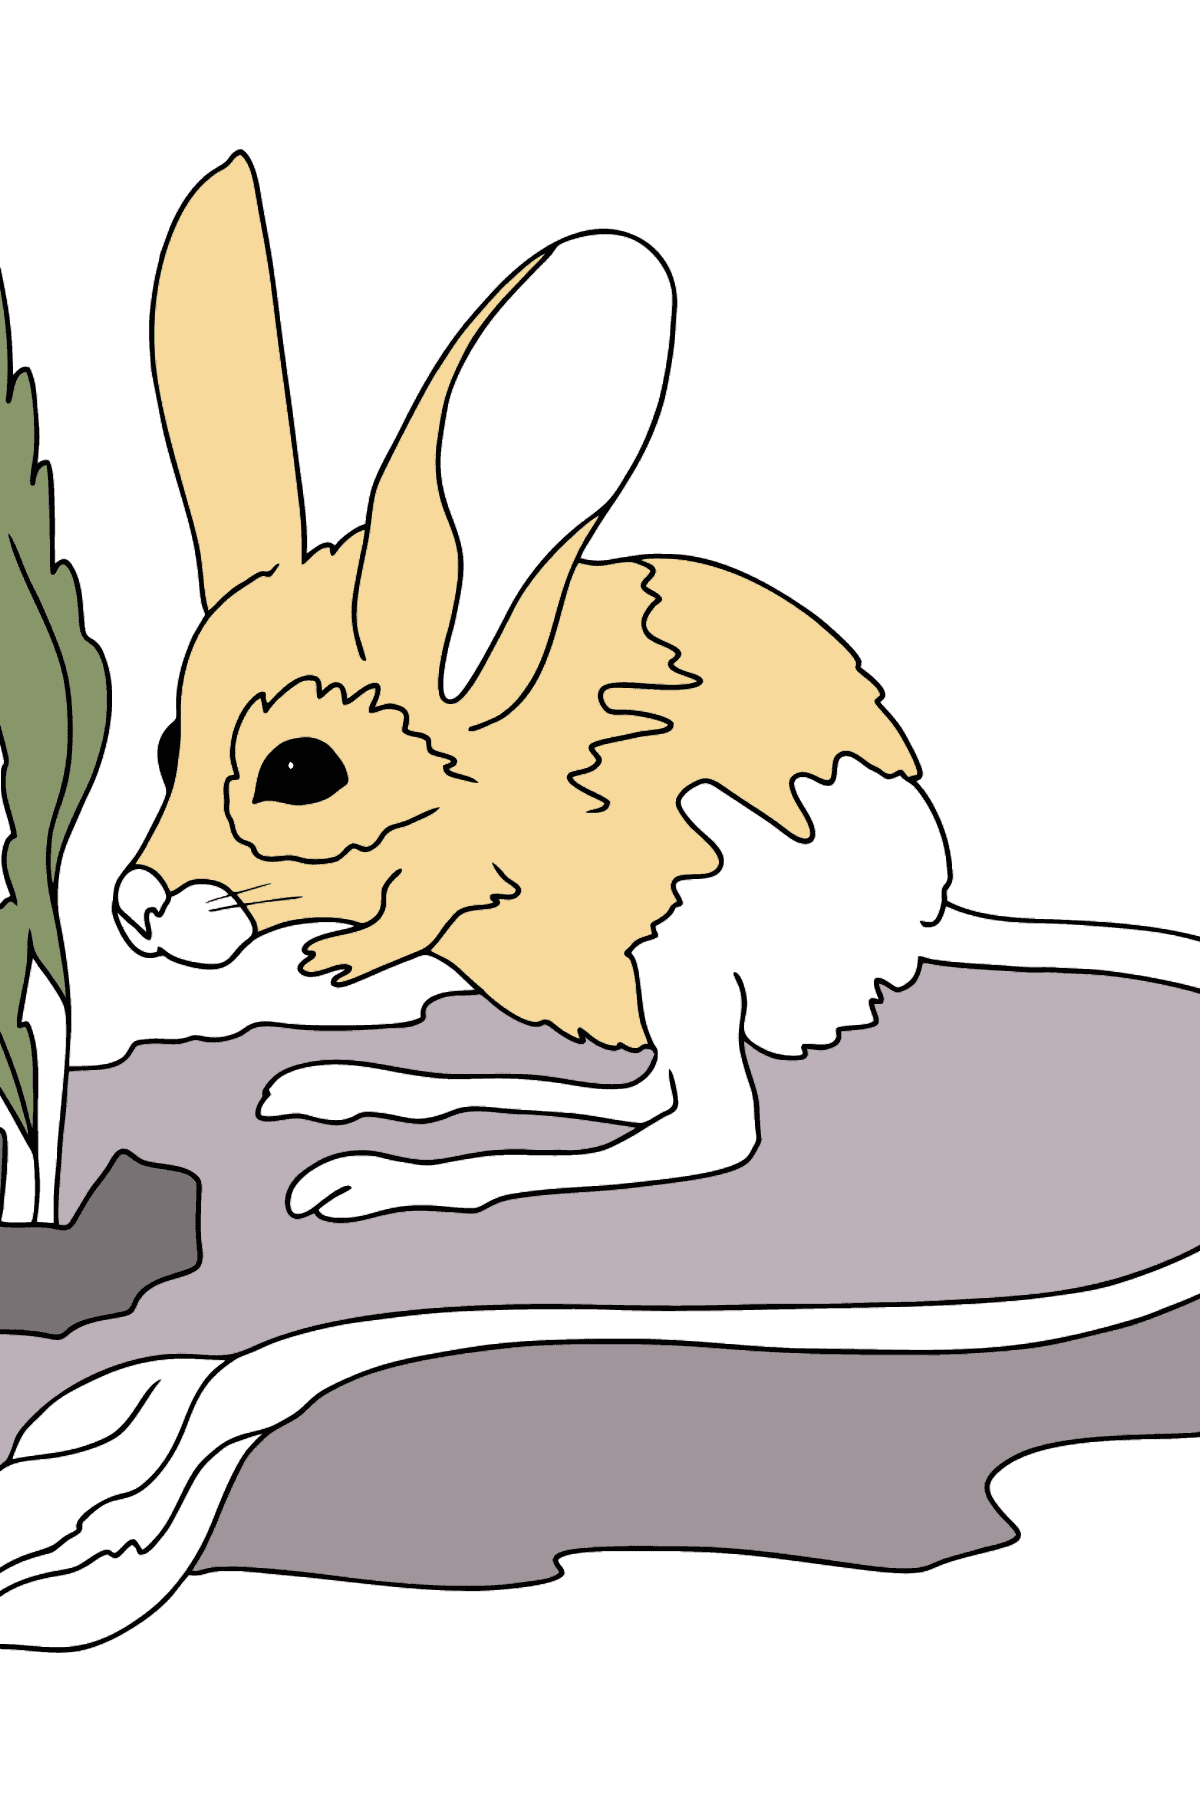 A Jerboa is Standing on its Long Hind Legs Coloring Page - Coloring Pages for Kids